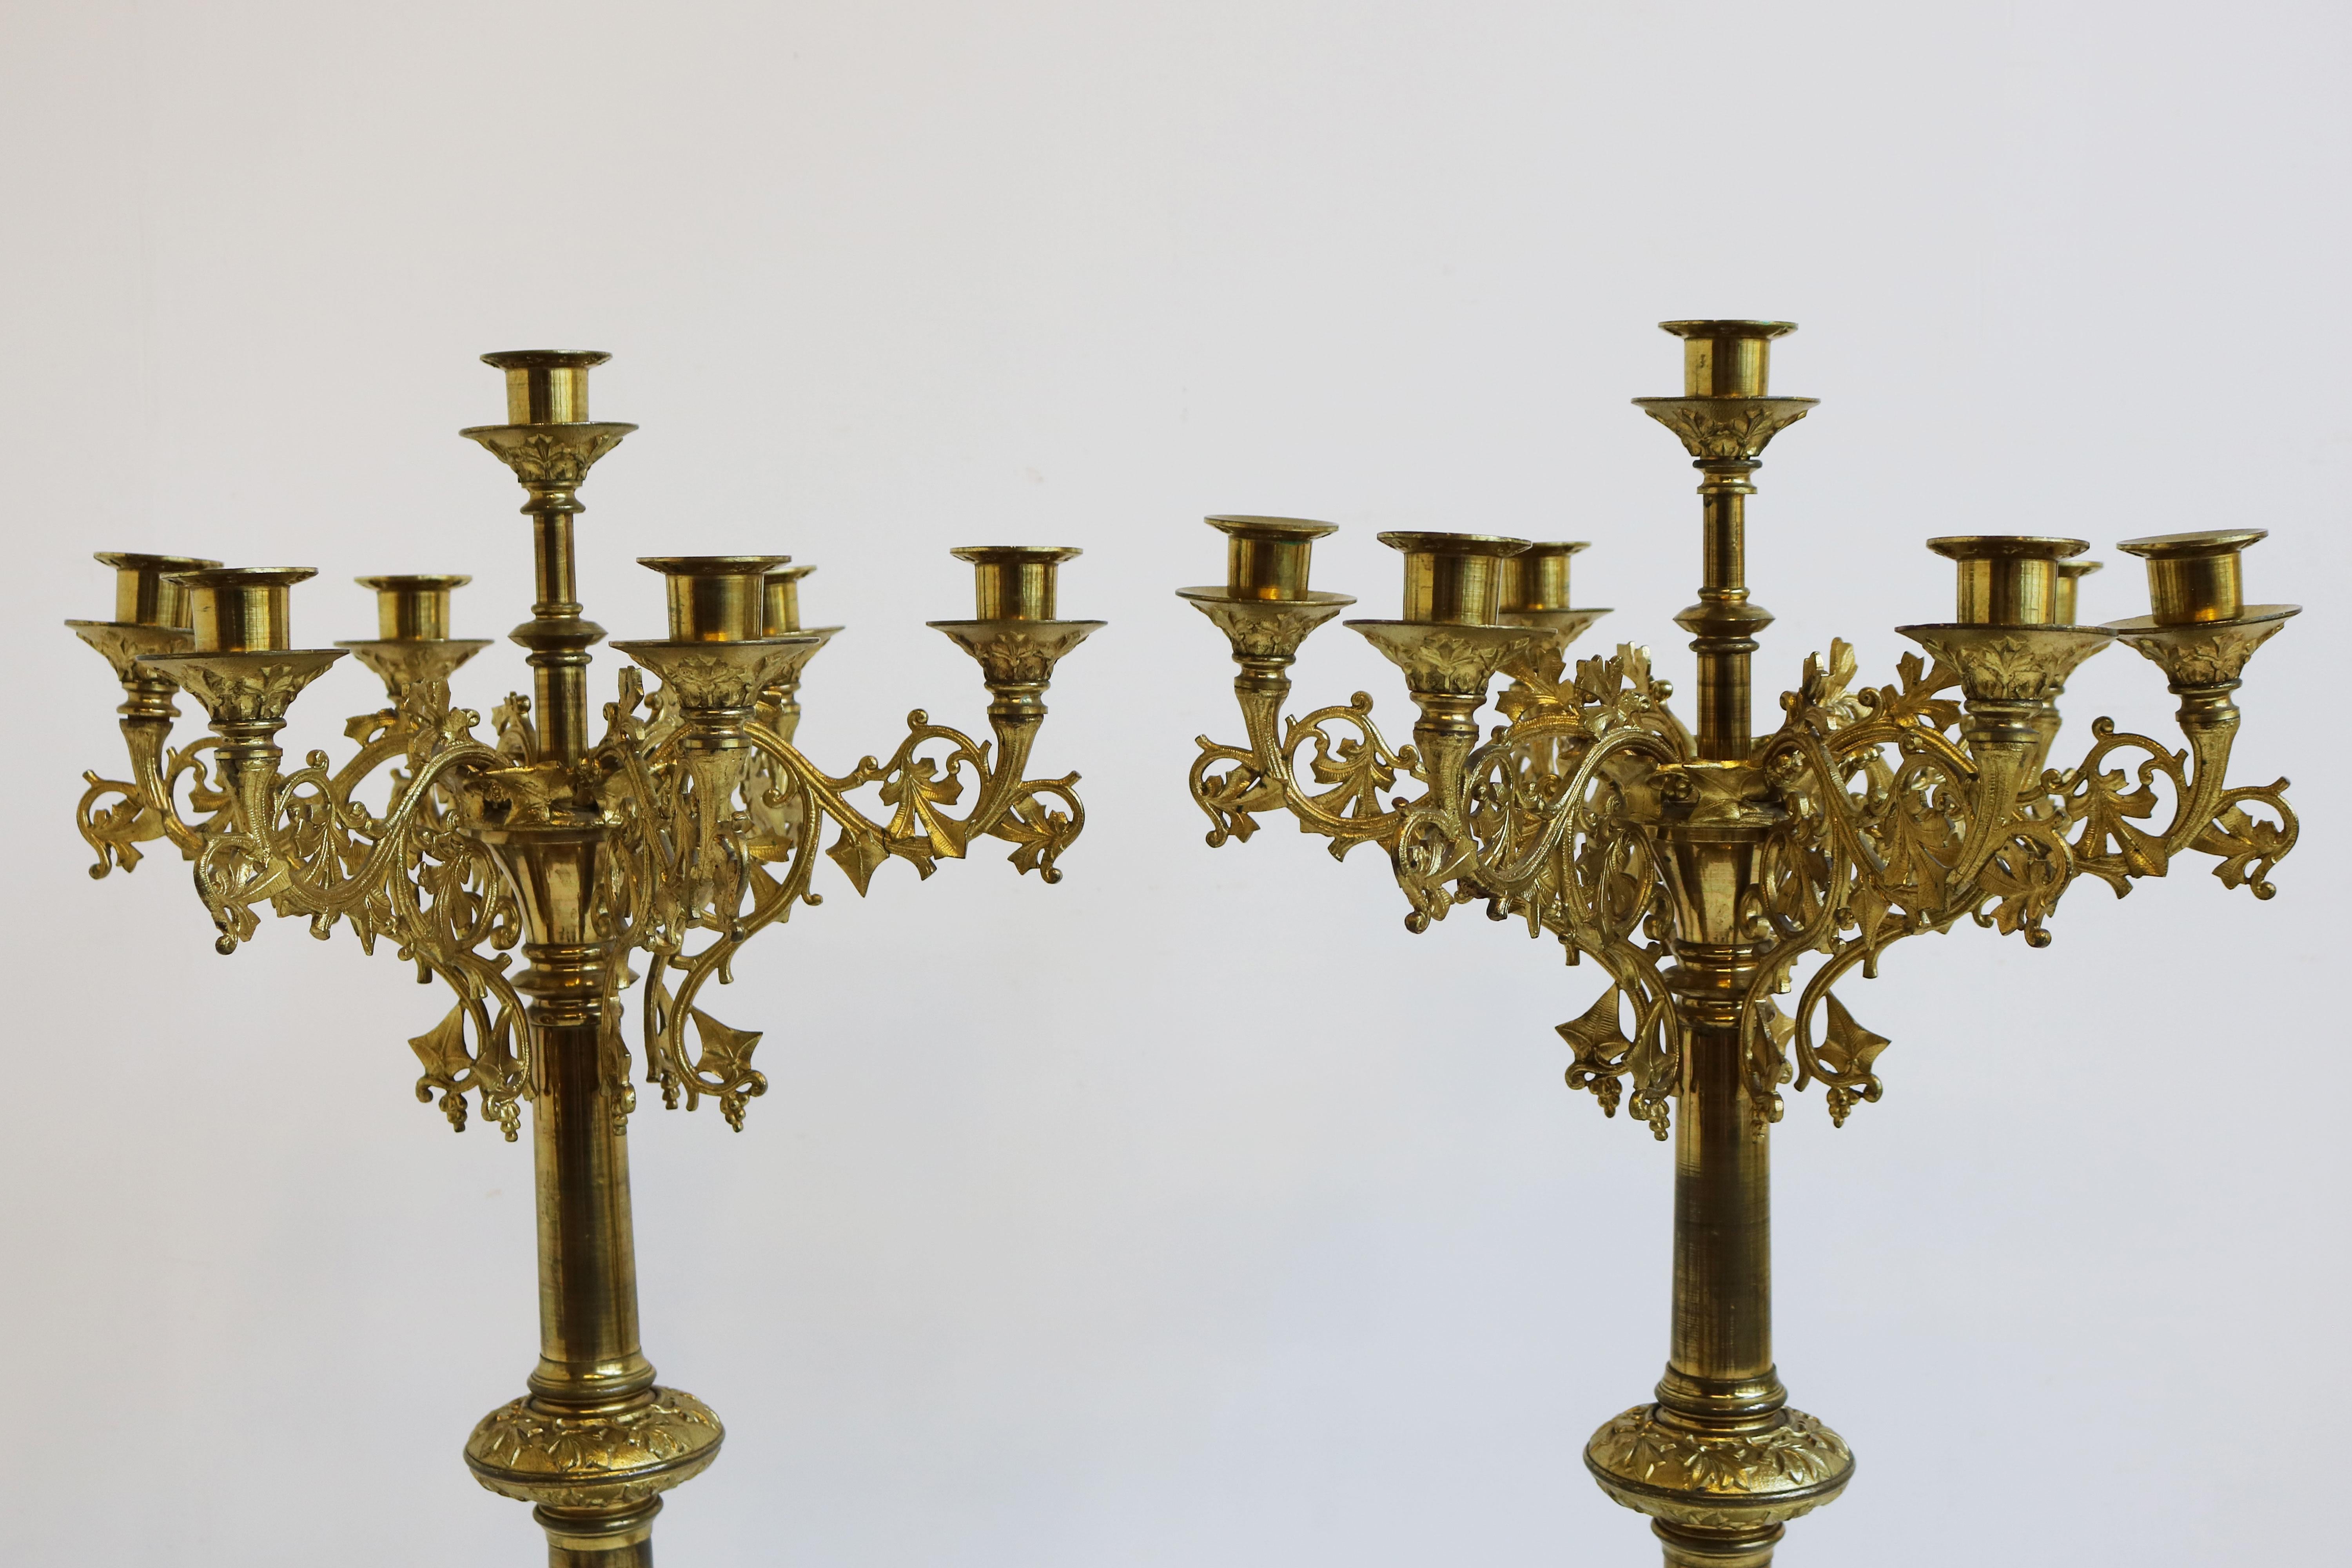 Huge Antique French Gilt Bronze Classical Clock Set 19th century Acanthus leaves For Sale 9